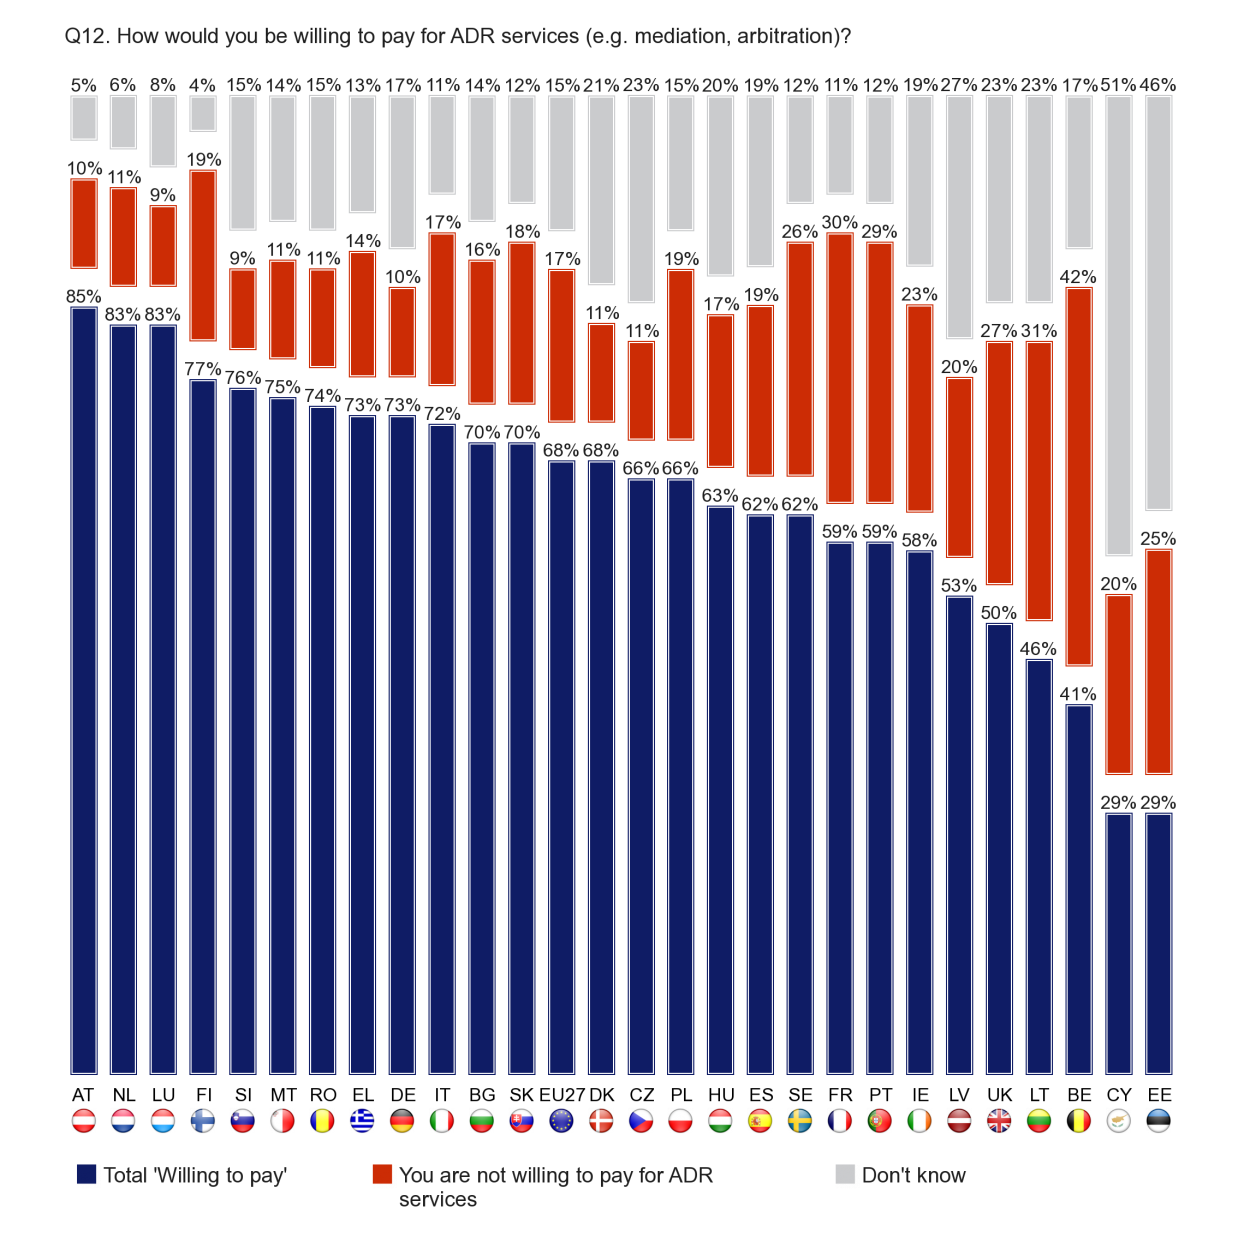 FLASH EUROBAROMETER Alternative Dispute Resolution Companies in Austria (85), the Netherlands (83) and Luxembourg (83) are the most likely to be willing to pay for ADR services.